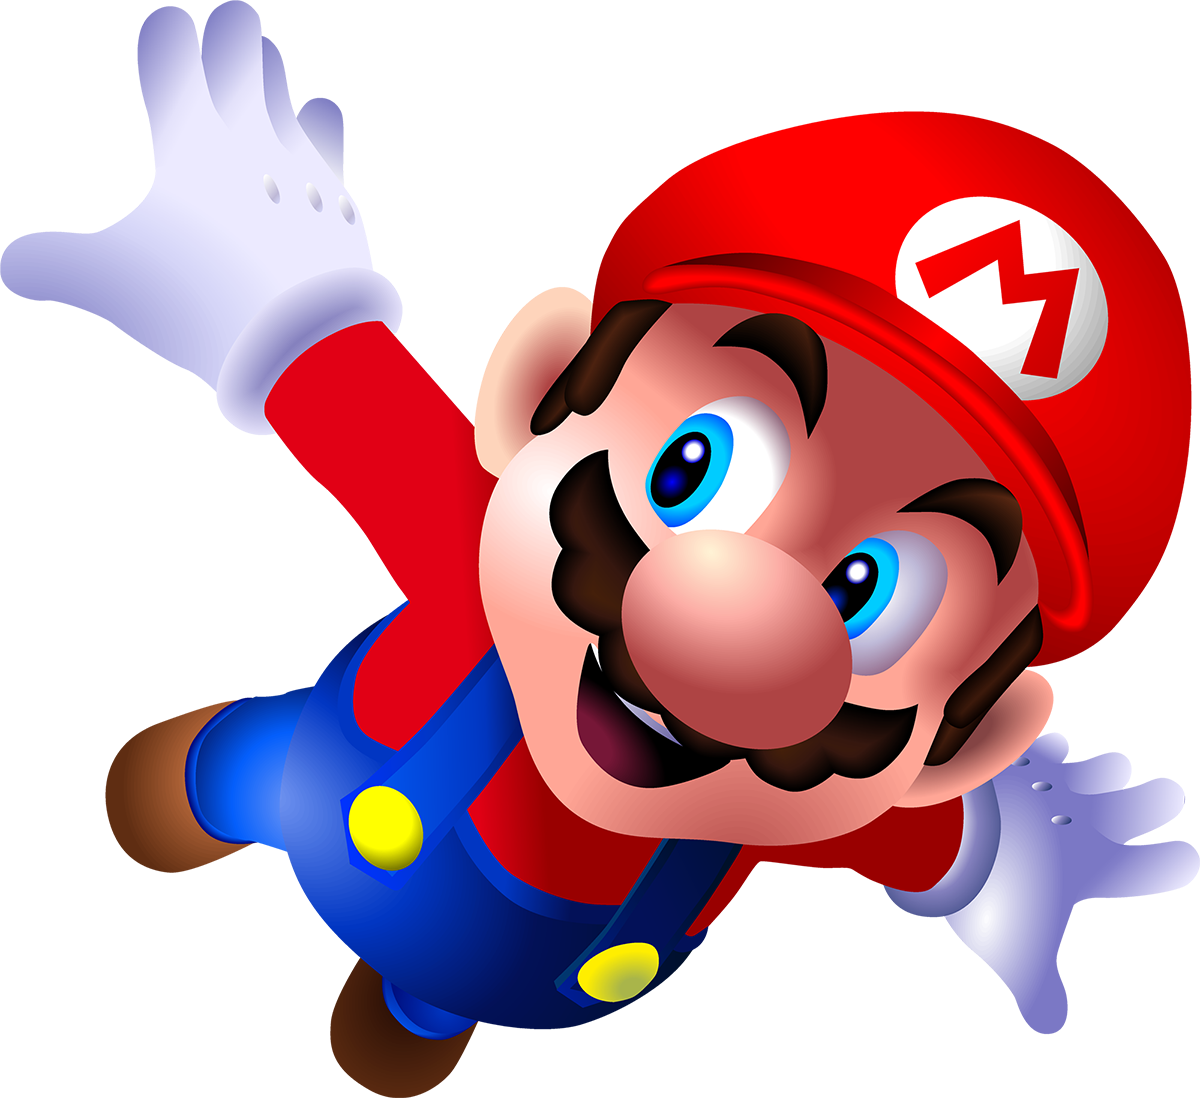 Mario Png Images Free Download Super Mario Png